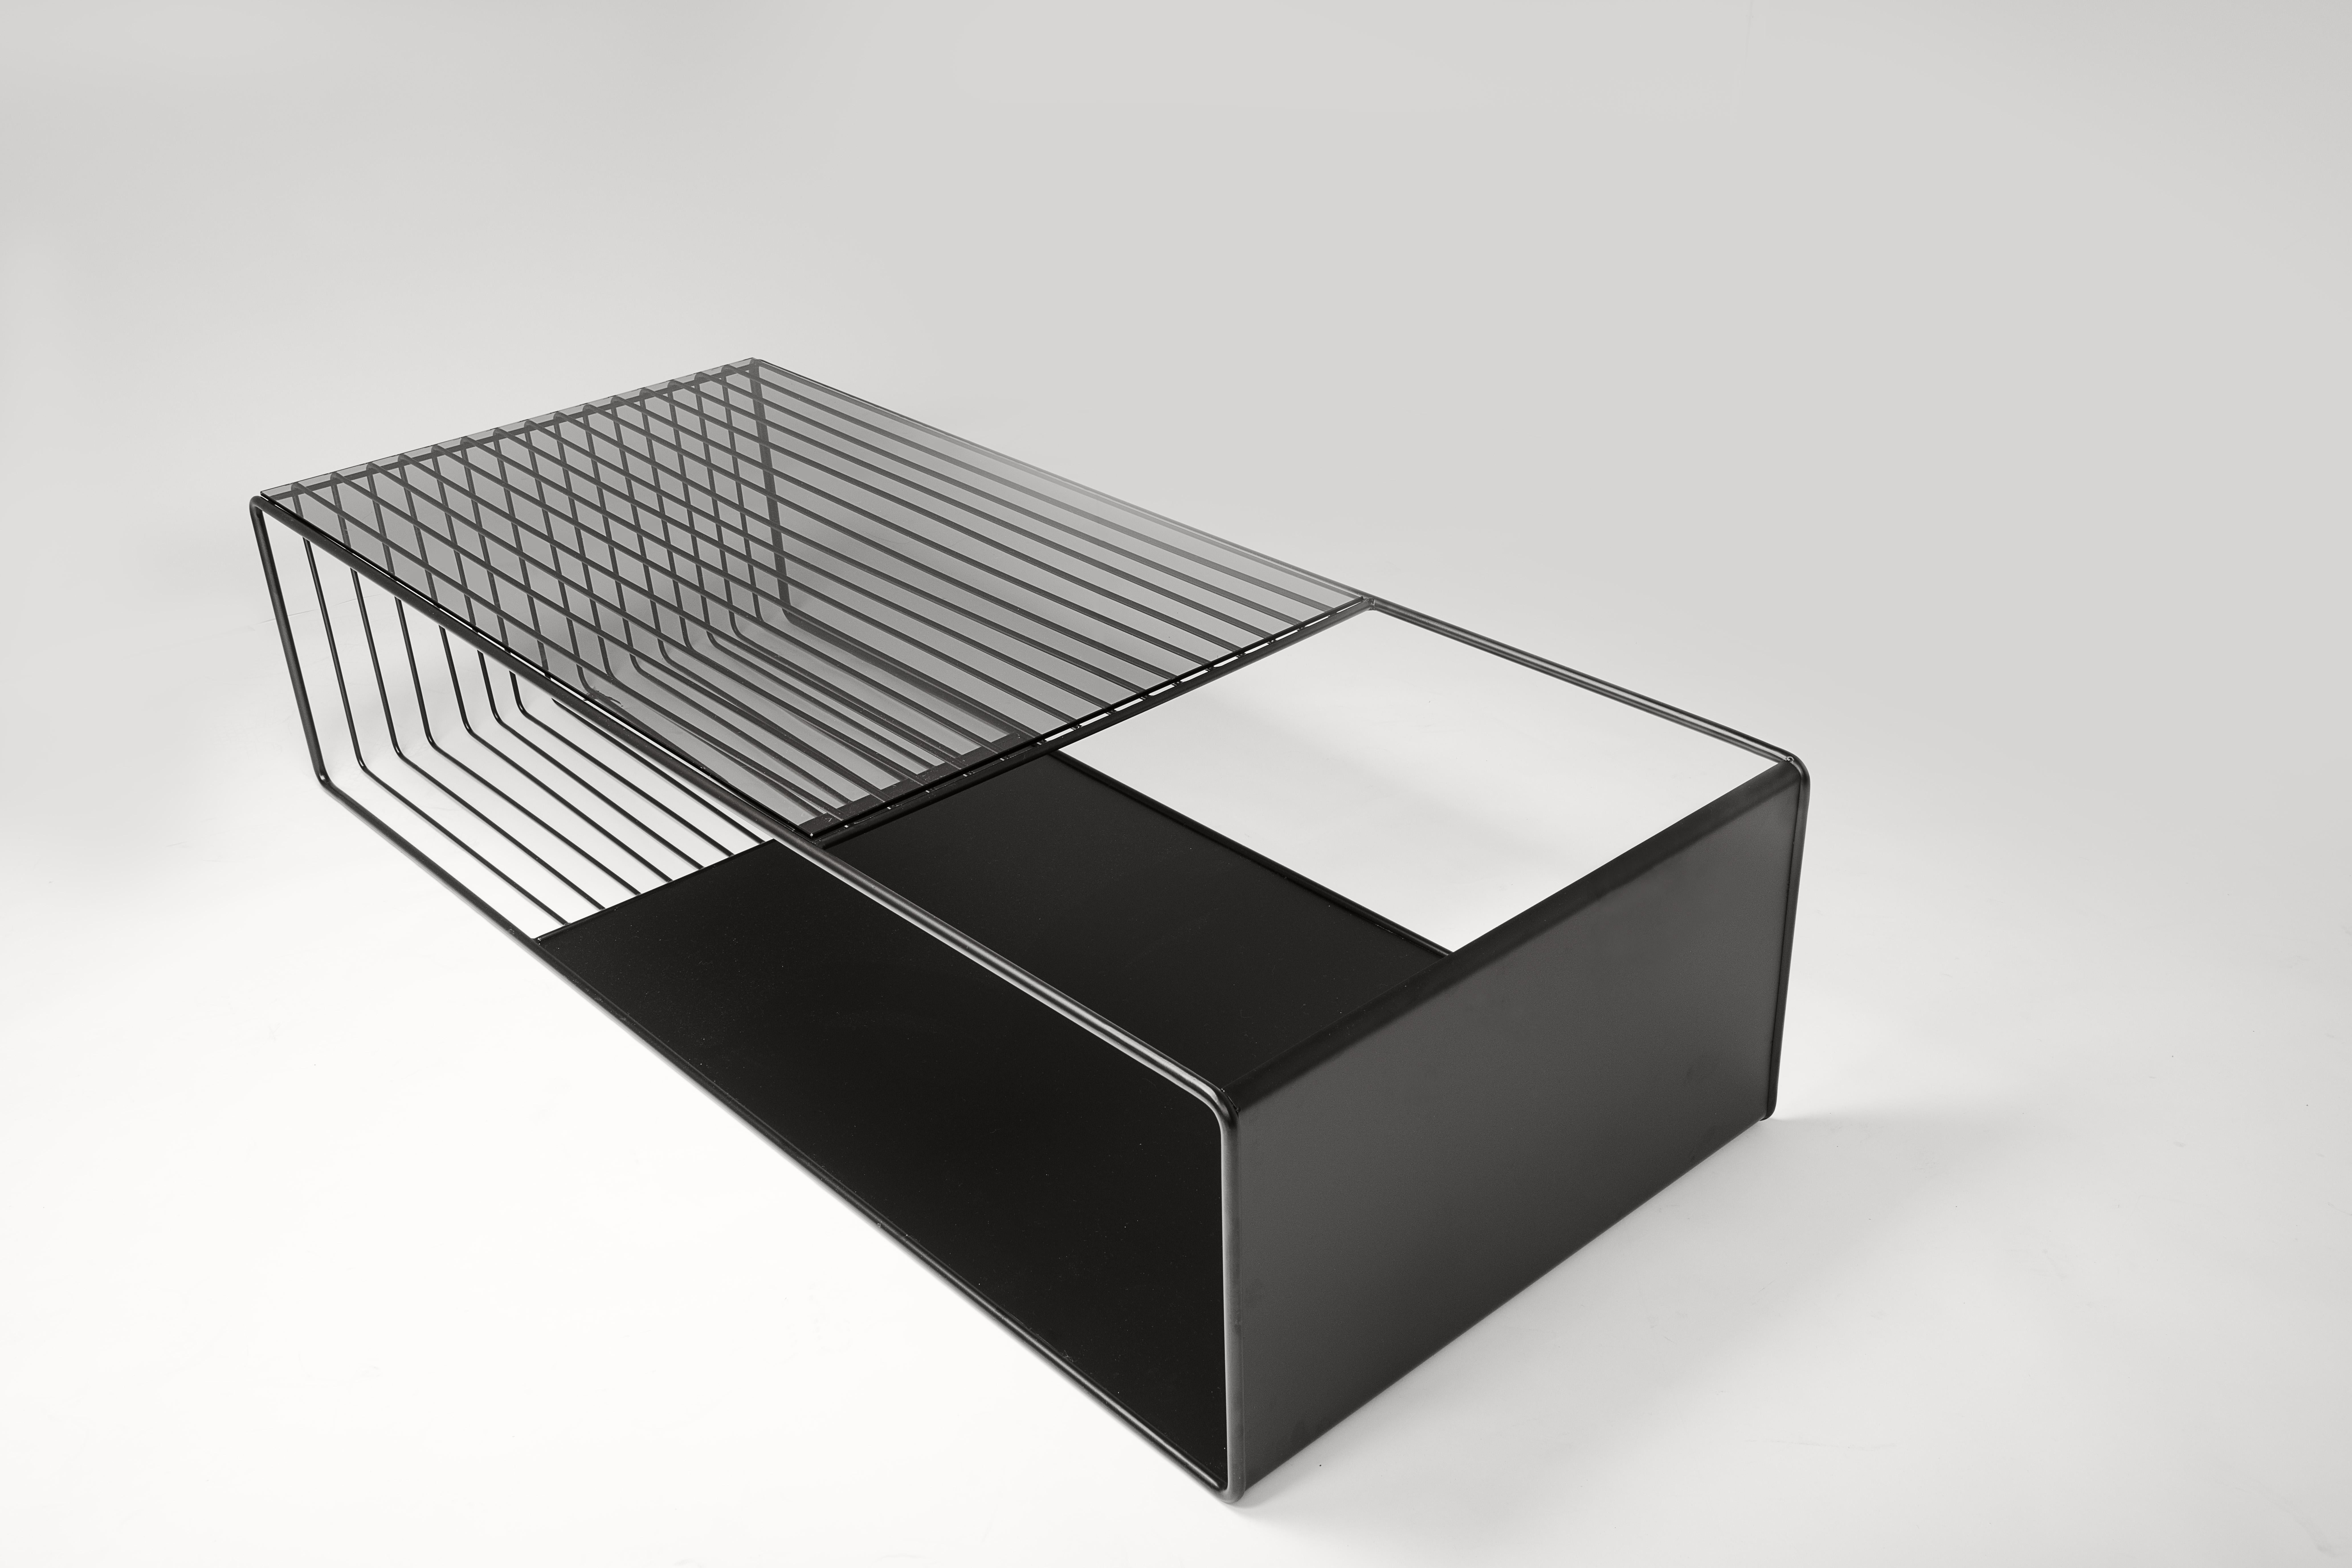 Black Kaleidoscope Low Coffee Table by Jialun Xiong
Dimensions: 60”W x 25”D x 14”H inch
Materials: Metal, Tempered tinted glass

Custom Size option available.

“ I have an aptitude for exploring the nuances of infinite combination of